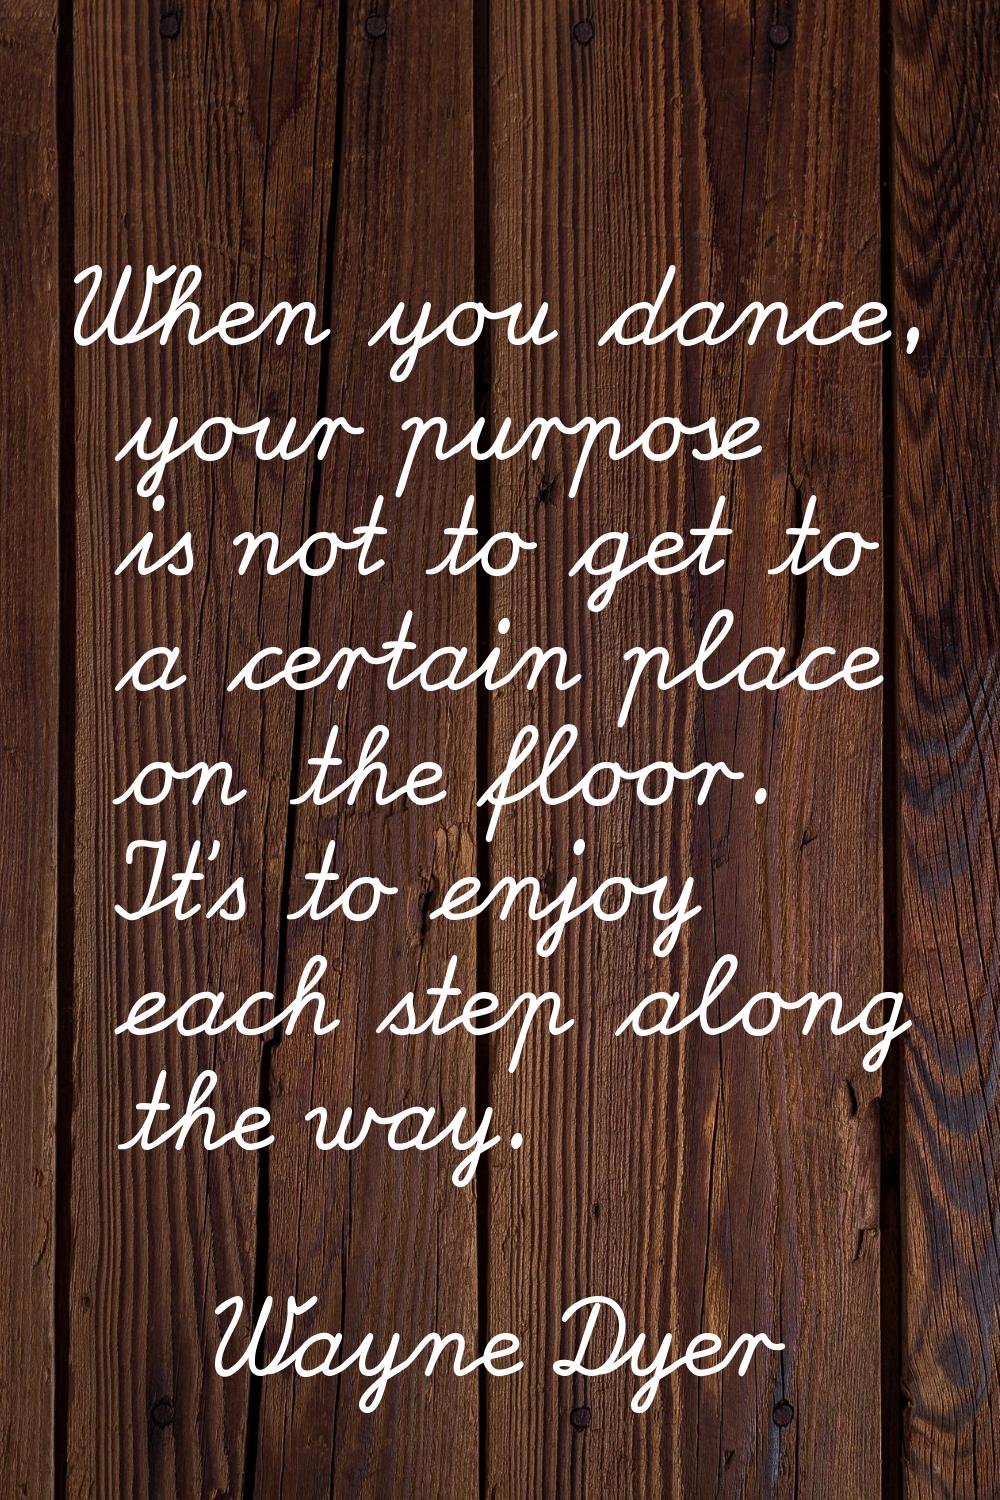 When you dance, your purpose is not to get to a certain place on the floor. It's to enjoy each step